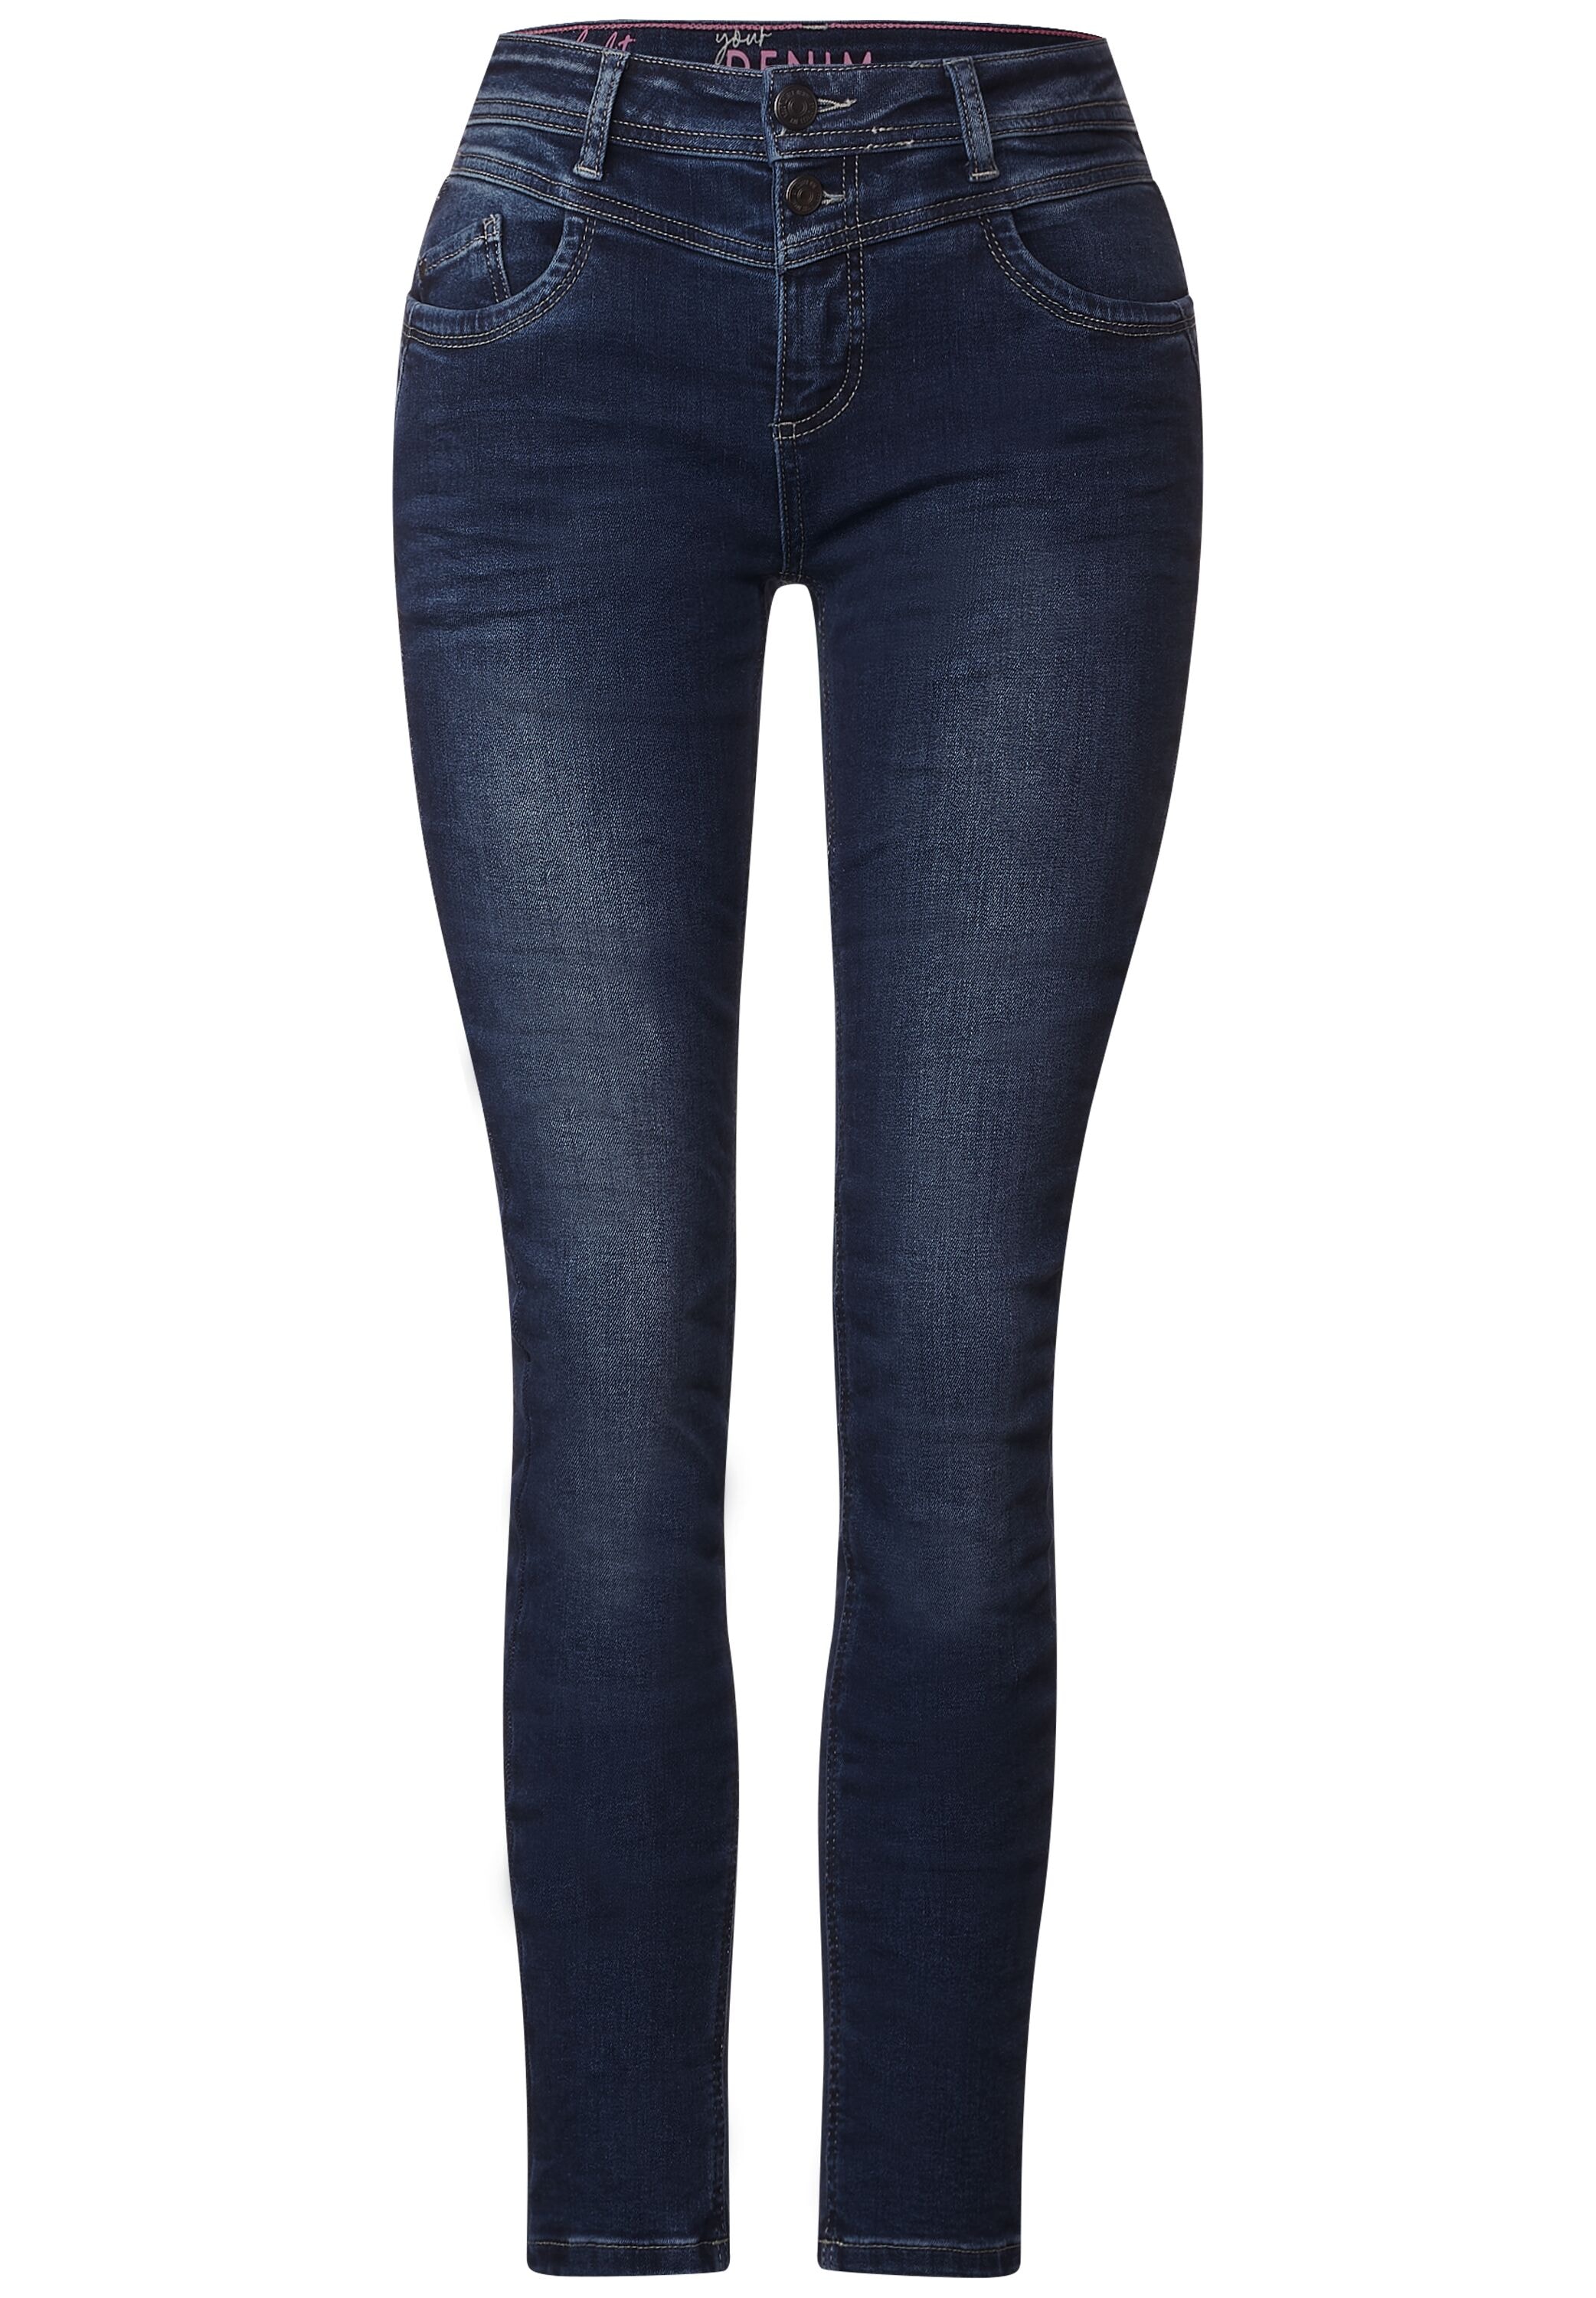 STREET ONE Slim-fit-Jeans, softer Materialmix online kaufen | I'm walking